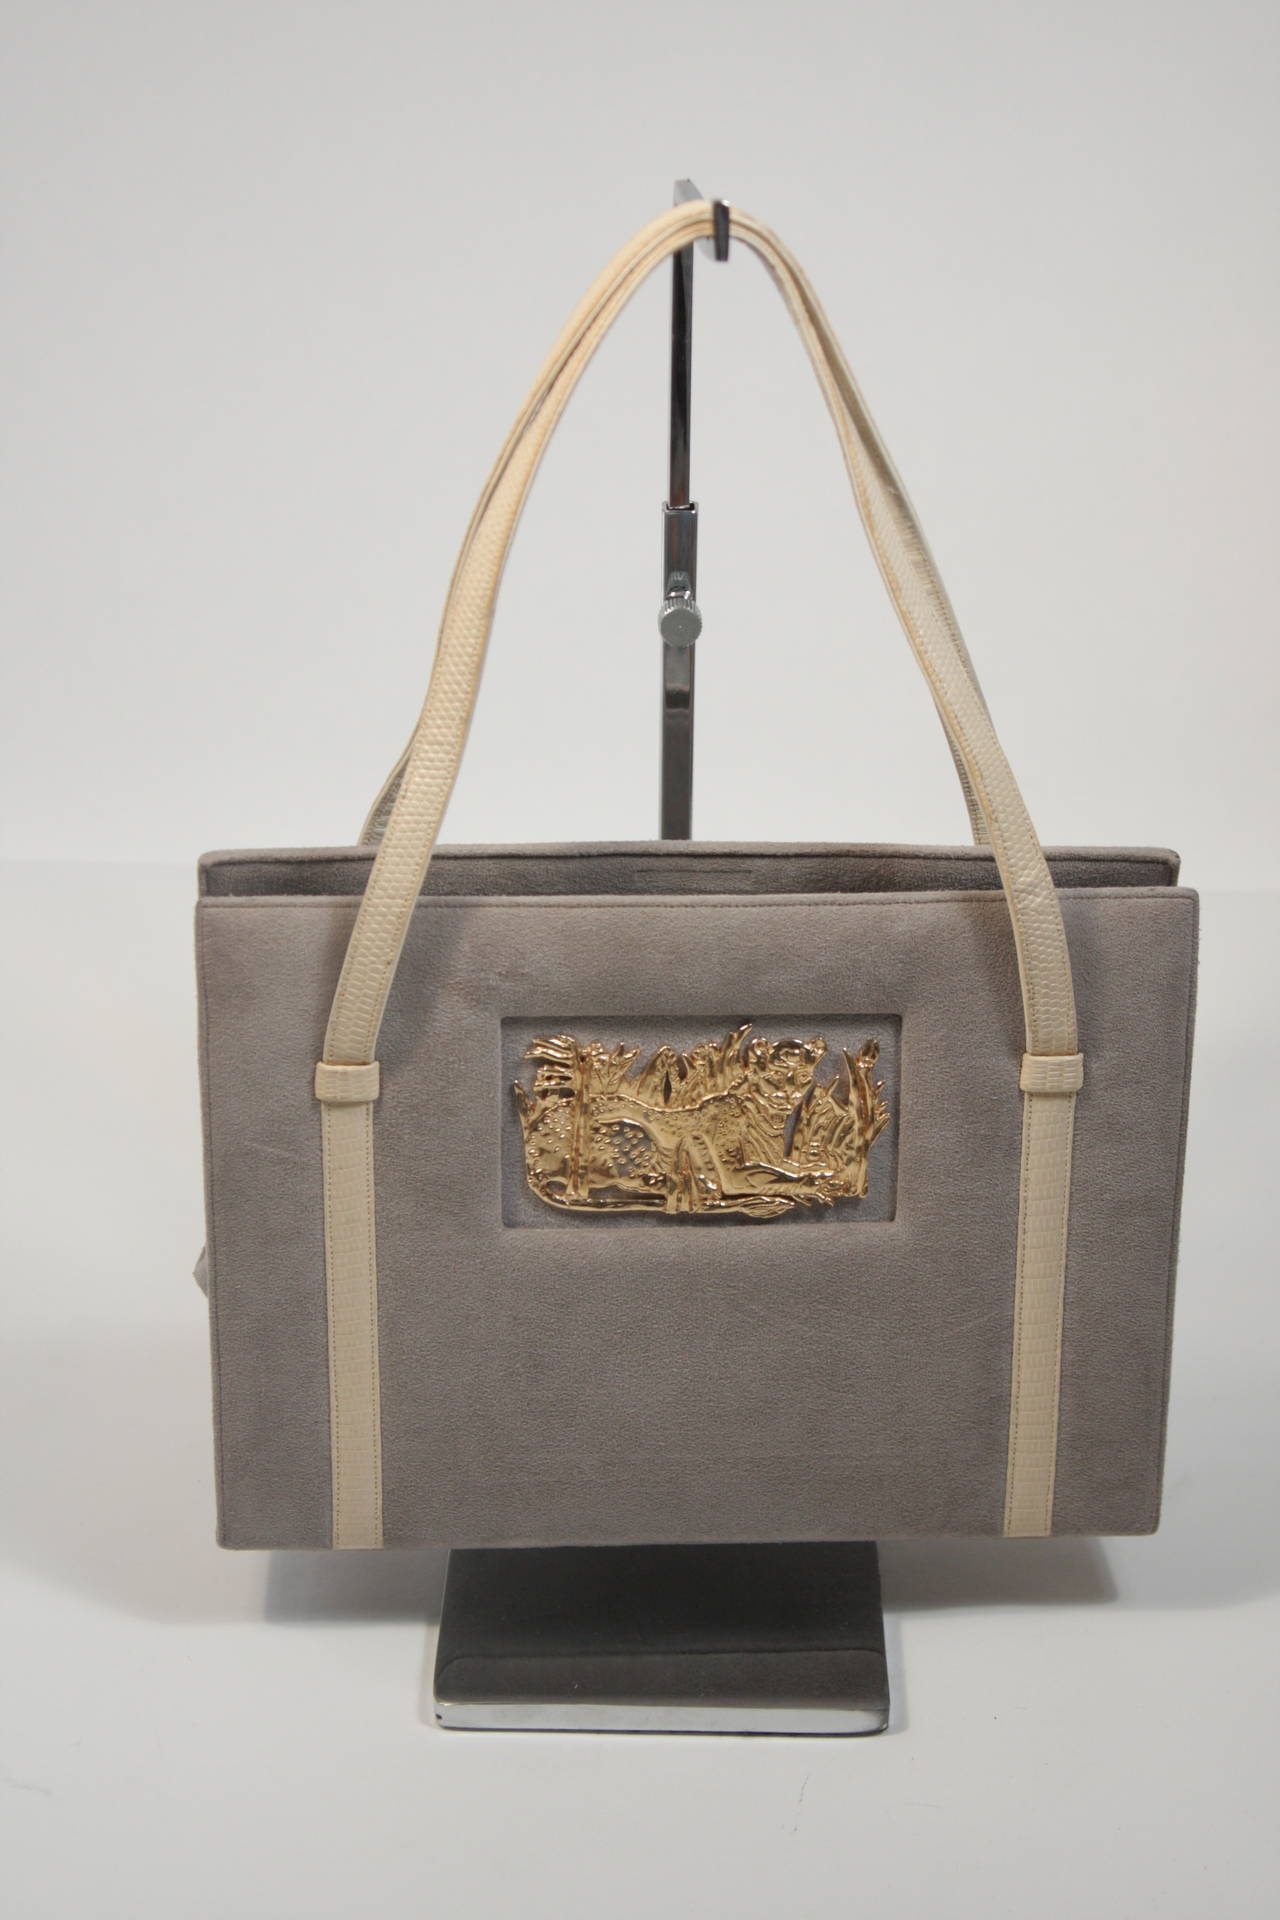 This vintage Martin Van Schaak purse is composed of a light grey suede and features a gold leopard accent. The bags interior is in excellent condition, the outside suede shows has minor discoloration due to age and light use. 

**Please